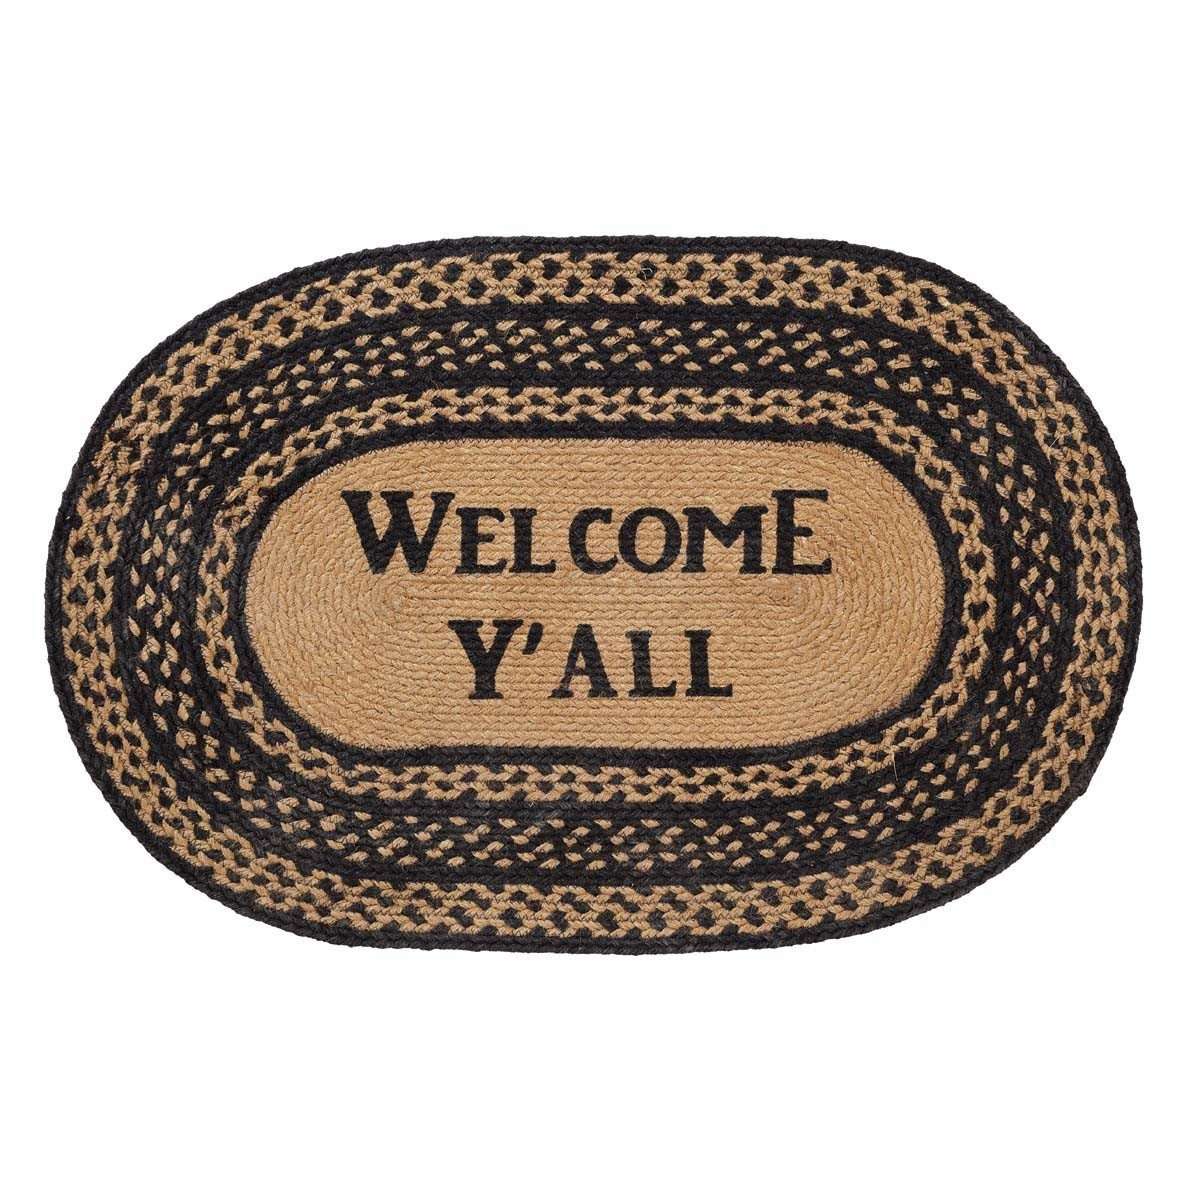 Farmhouse Braided Jute Rug Oval/Rect Stencil Welcome Y'all VHC Brands rugs VHC Brands 20x30 inch Oval 